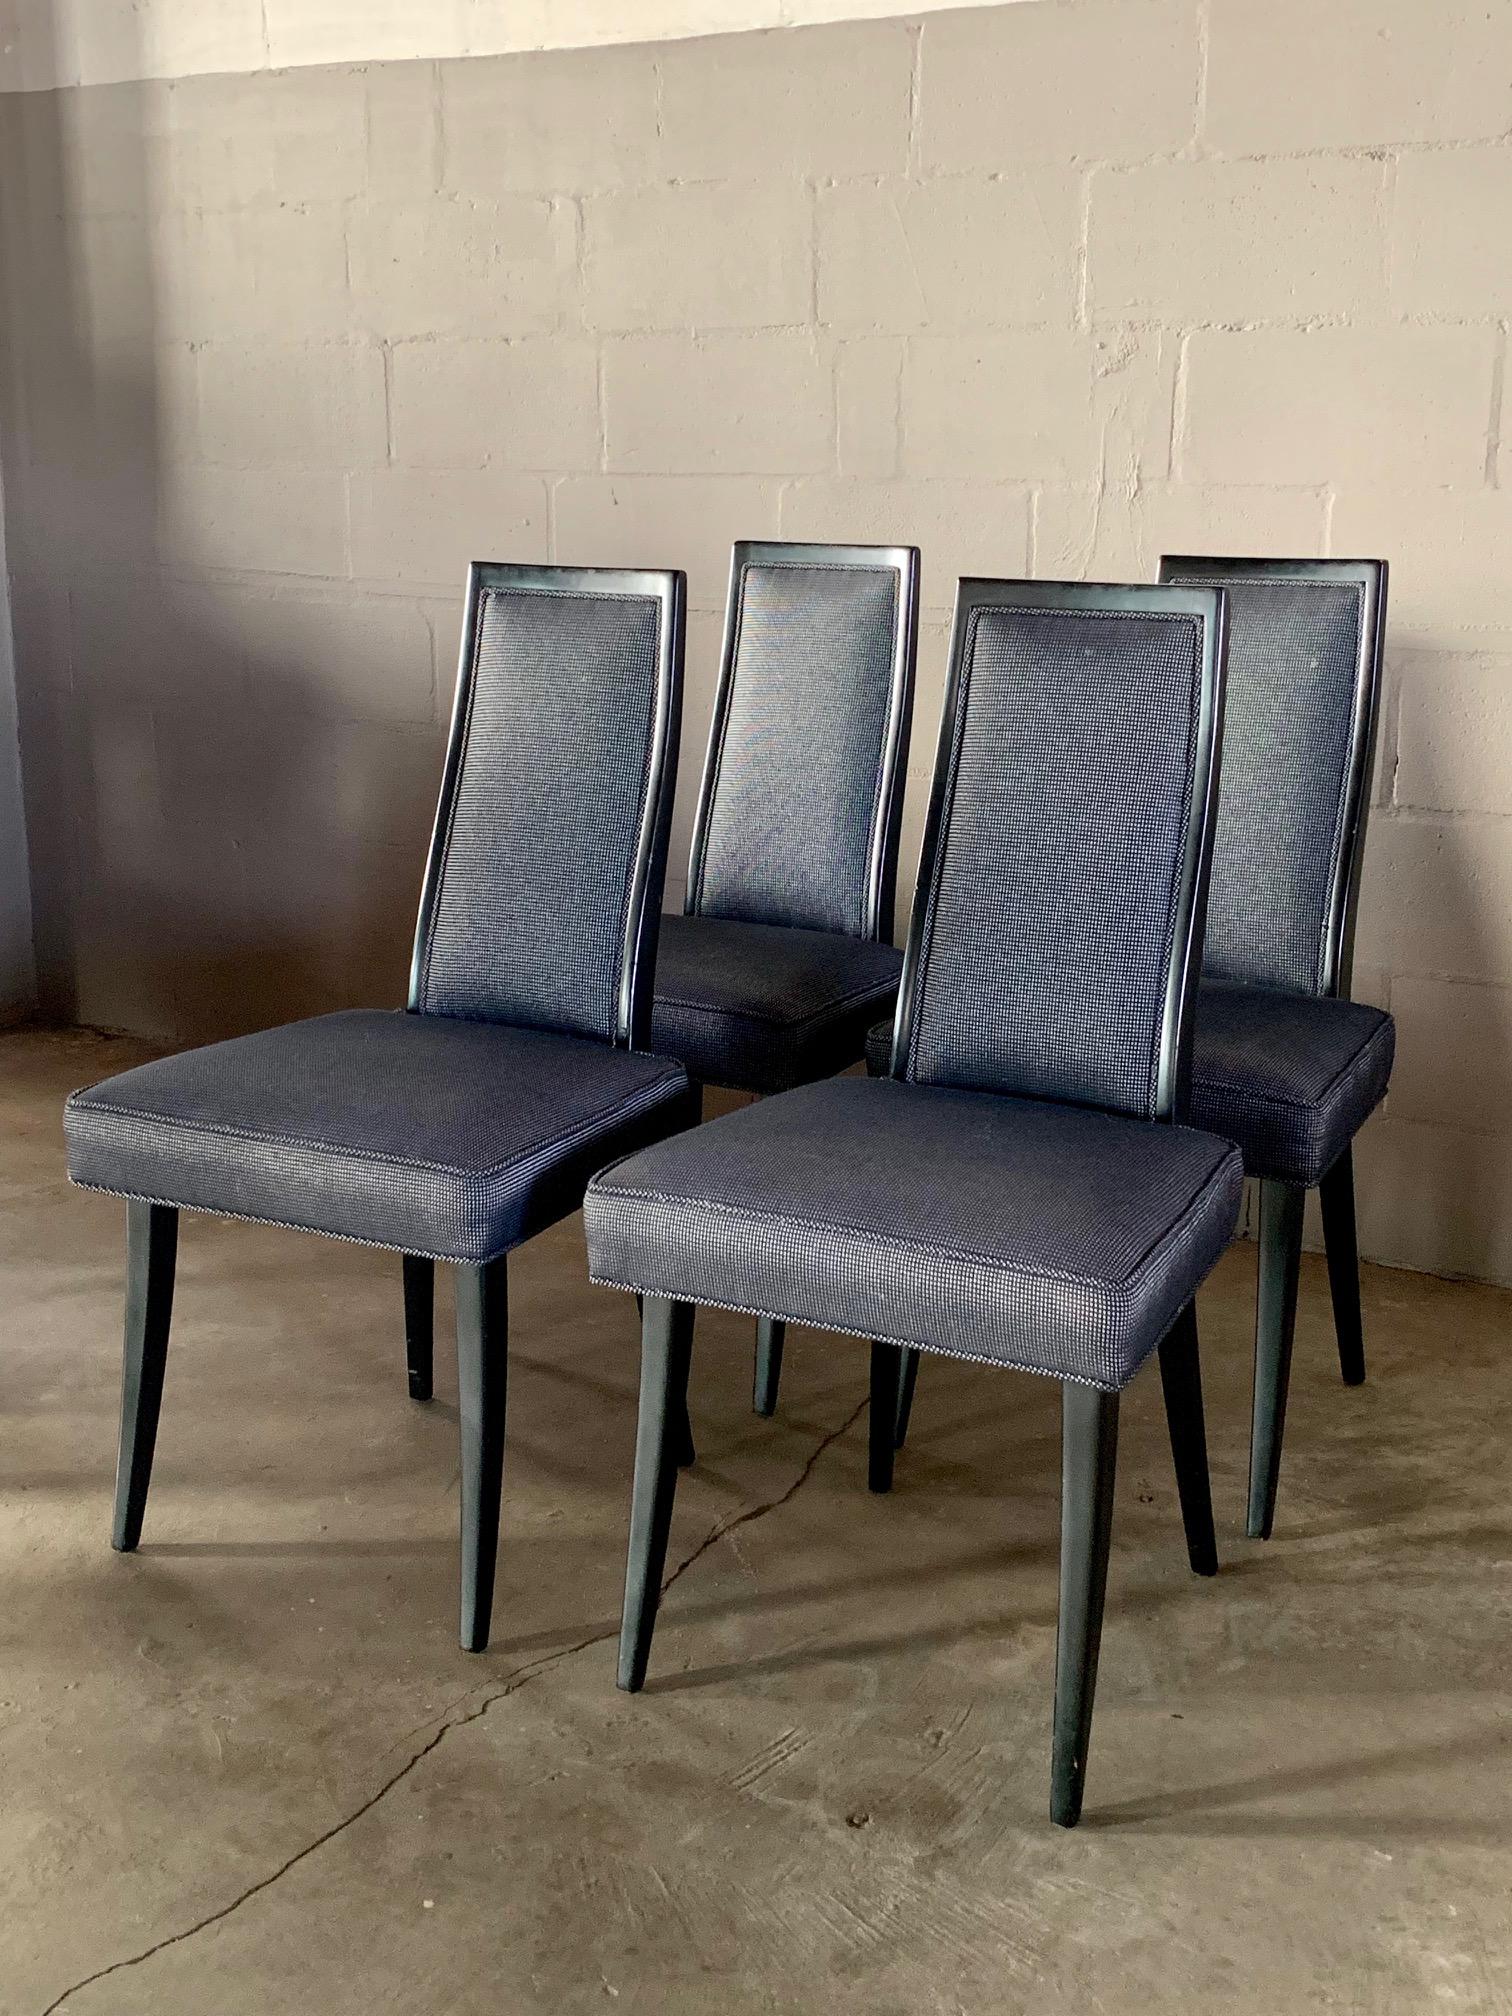 A set of elegant, high back dining chairs by Harvey Probber. Finished in black lacquer.